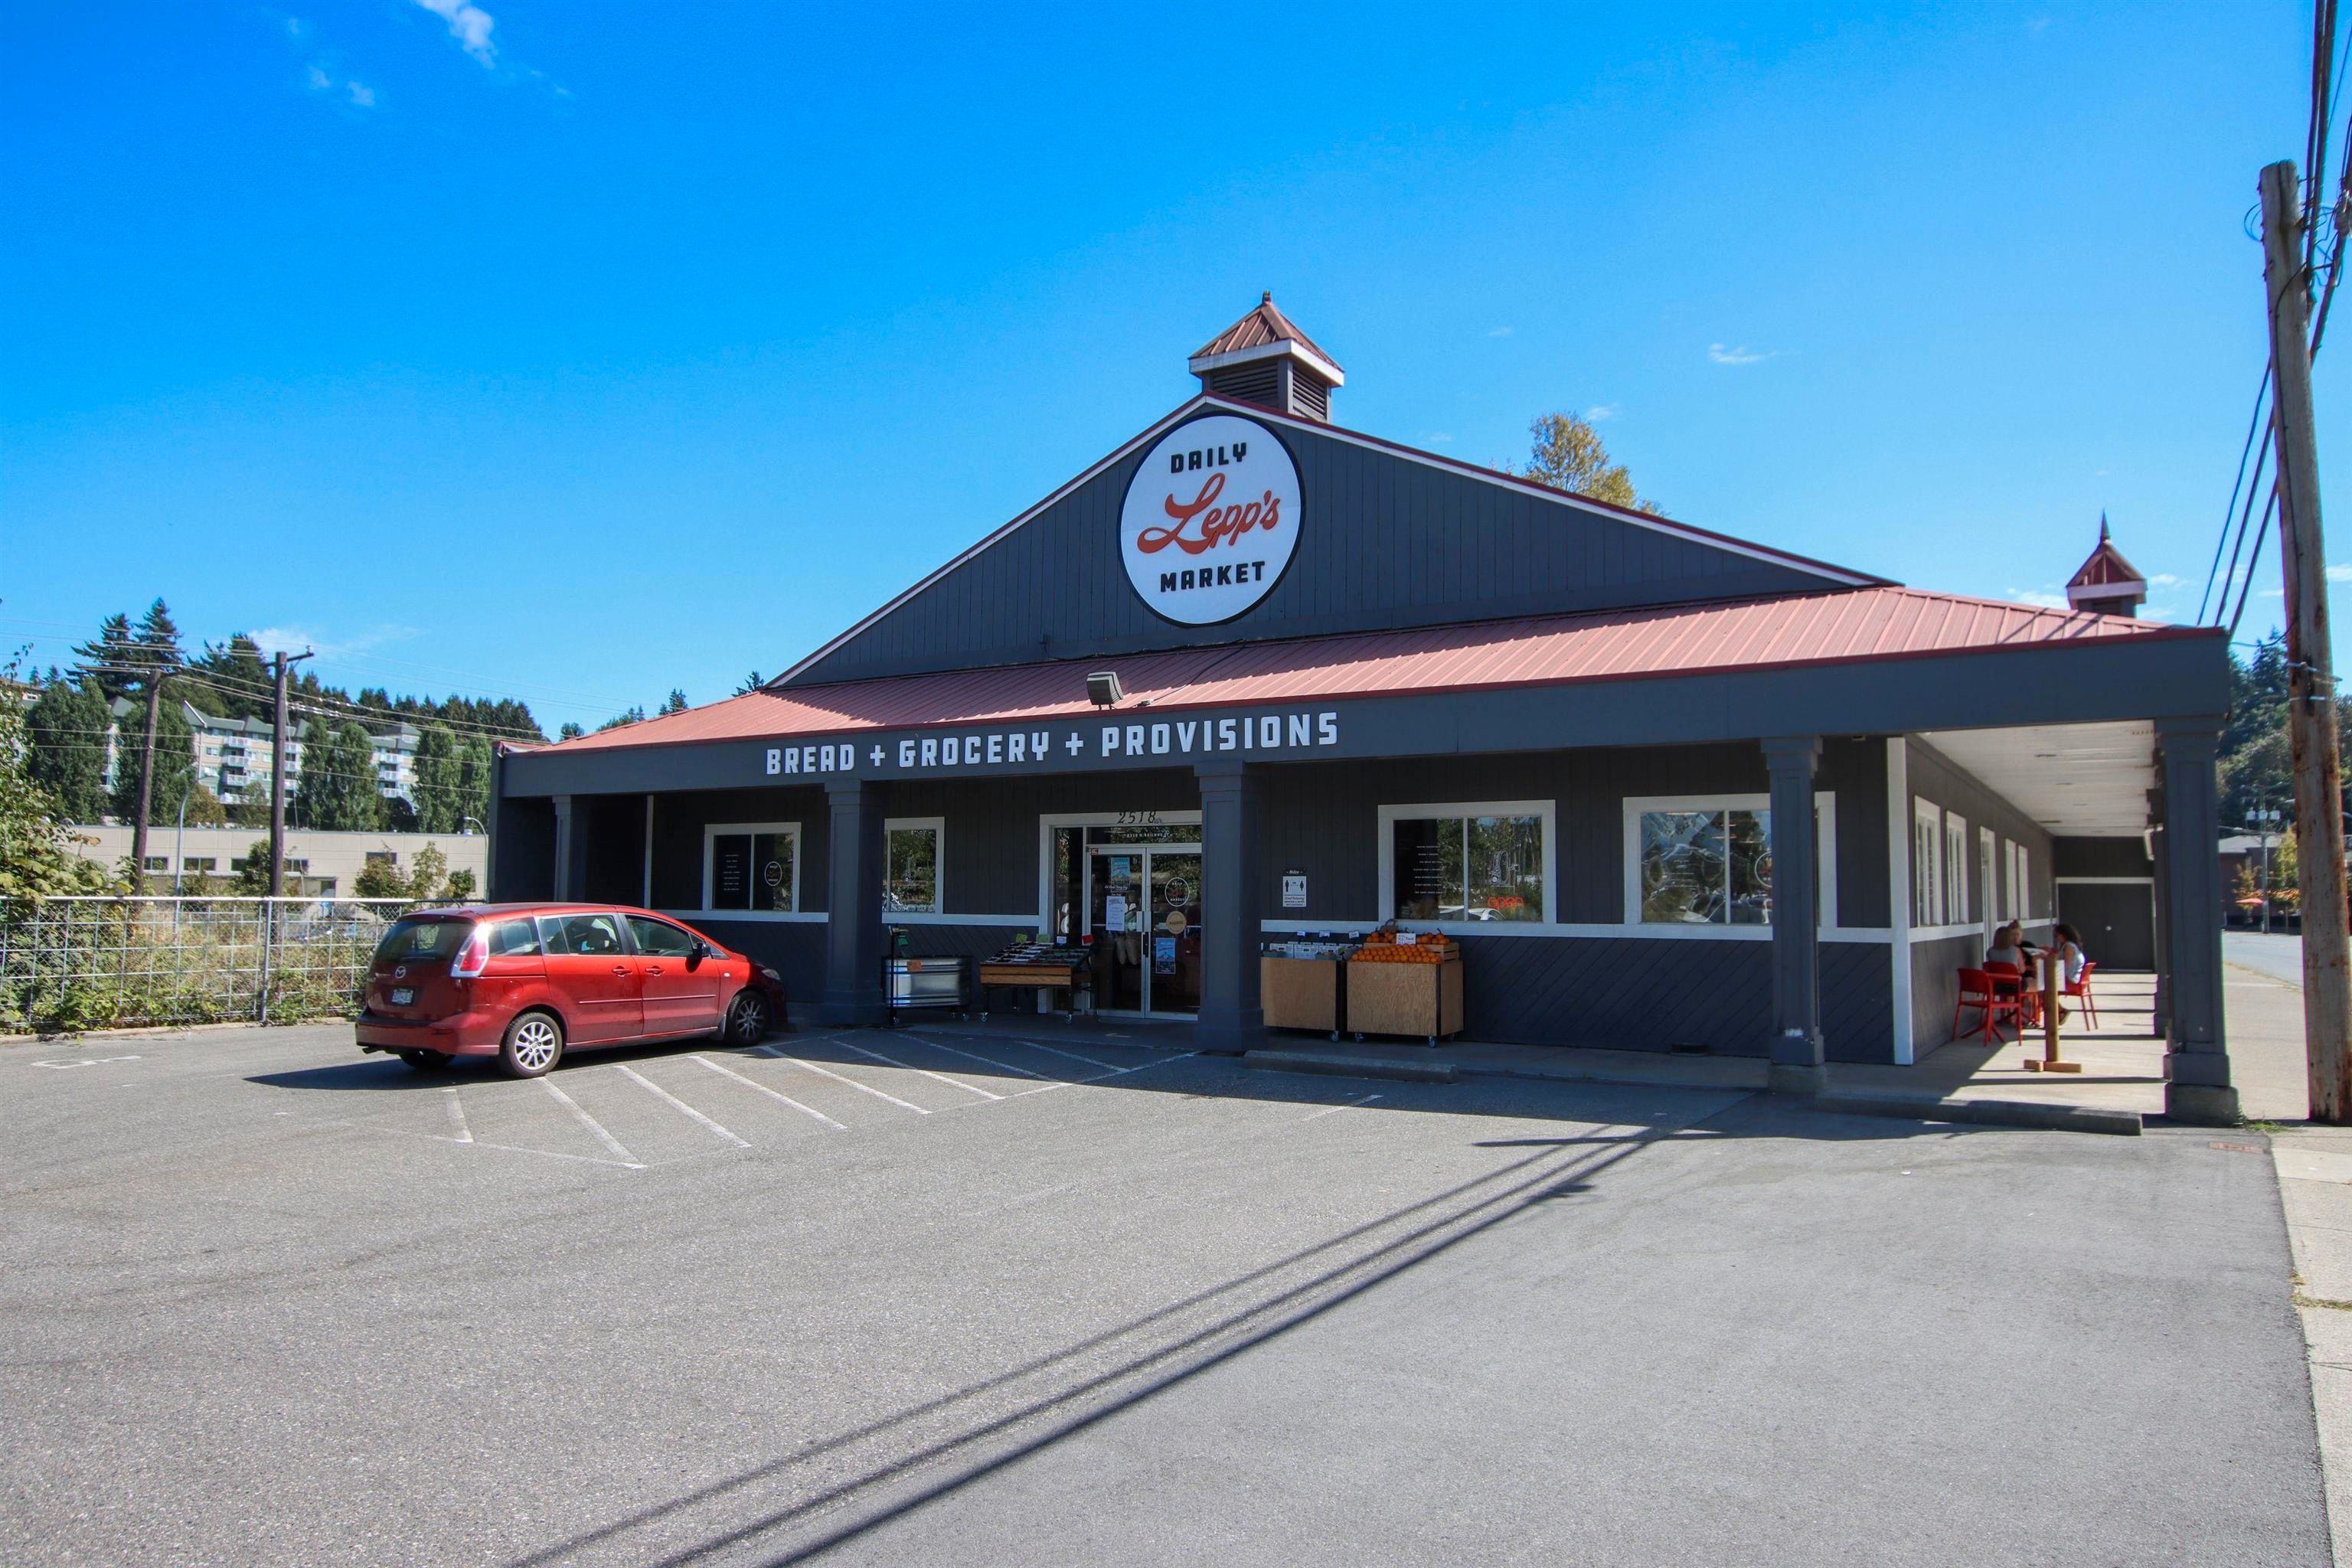 Main Photo: 2518 W RAILWAY Street: Business for sale in Abbotsford: MLS®# C8046592